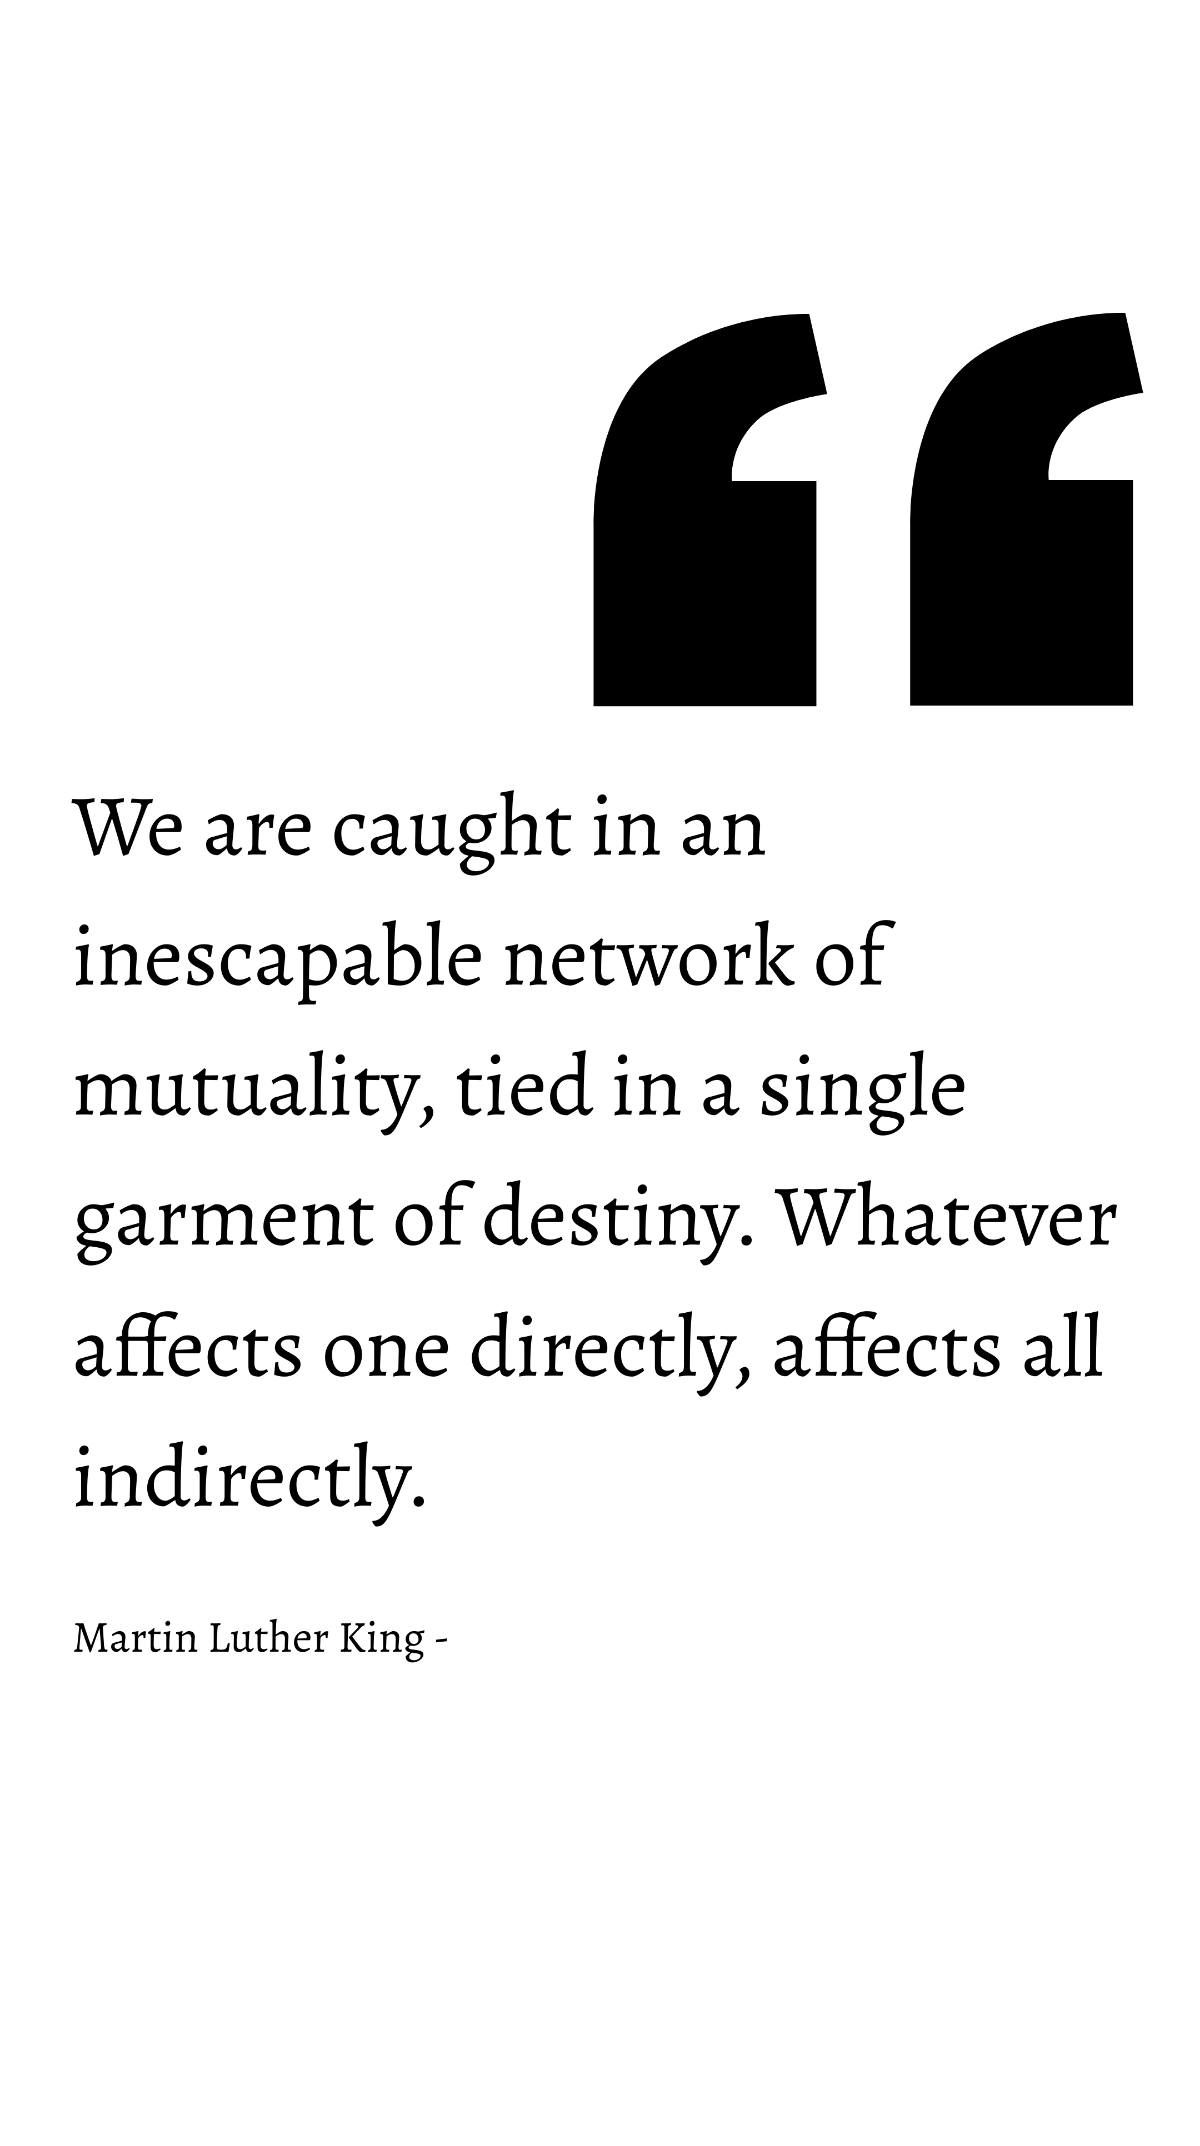 Martin Luther King - We are caught in an inescapable network of mutuality, tied in a single garment of destiny. Whatever affects one directly, affects all indirectly. Template